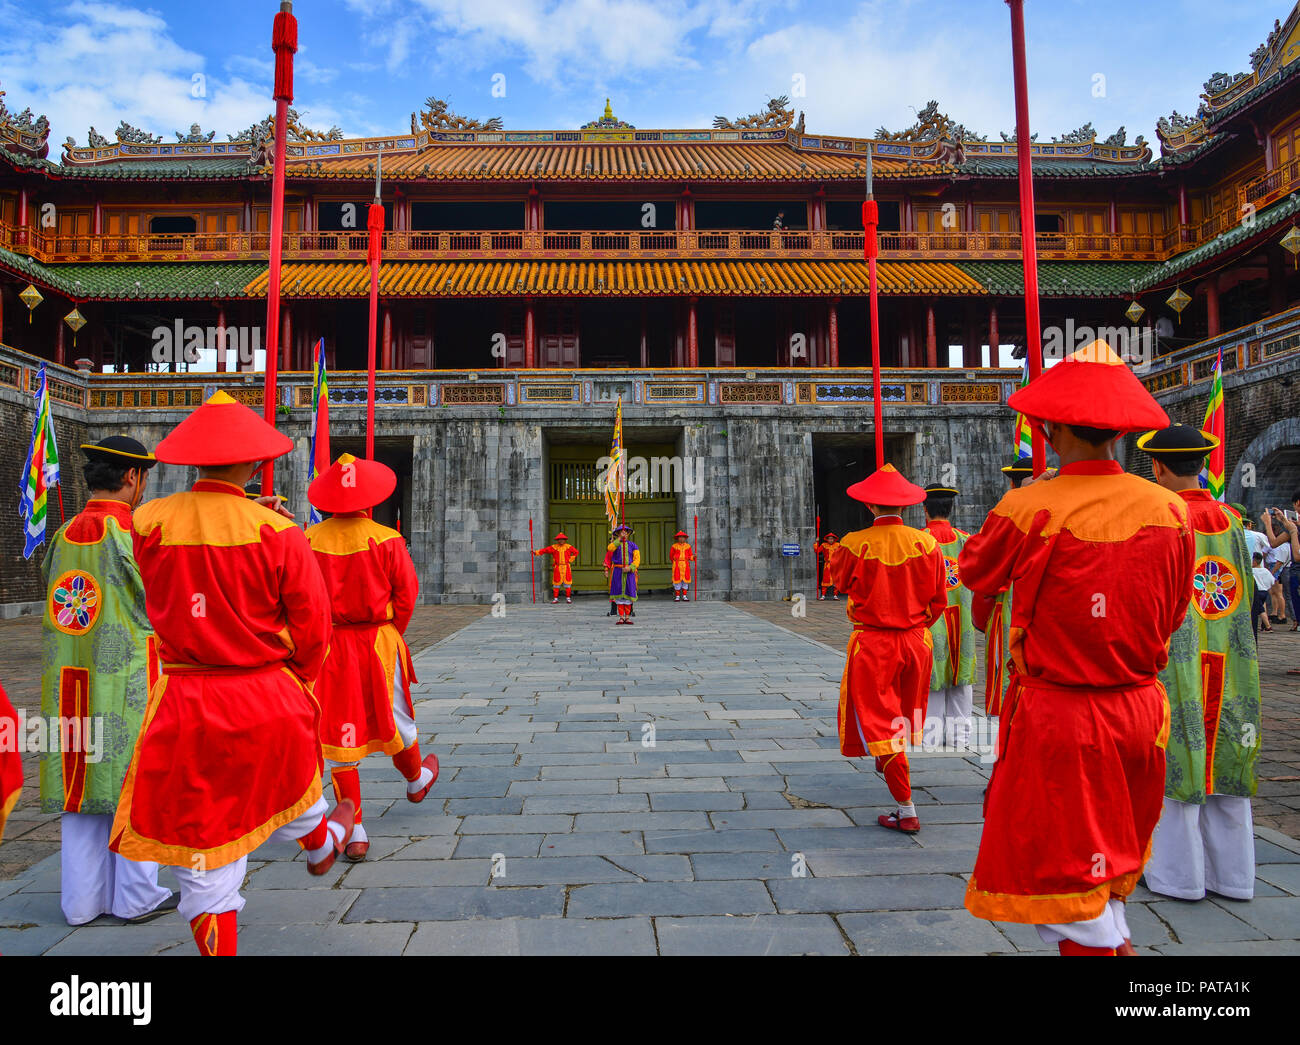 Hue, Vietnam - Jul 21, 2018. The royal guards parade marching to the Hue Imperial City (The Citadel) for change of guards cermony. Stock Photo